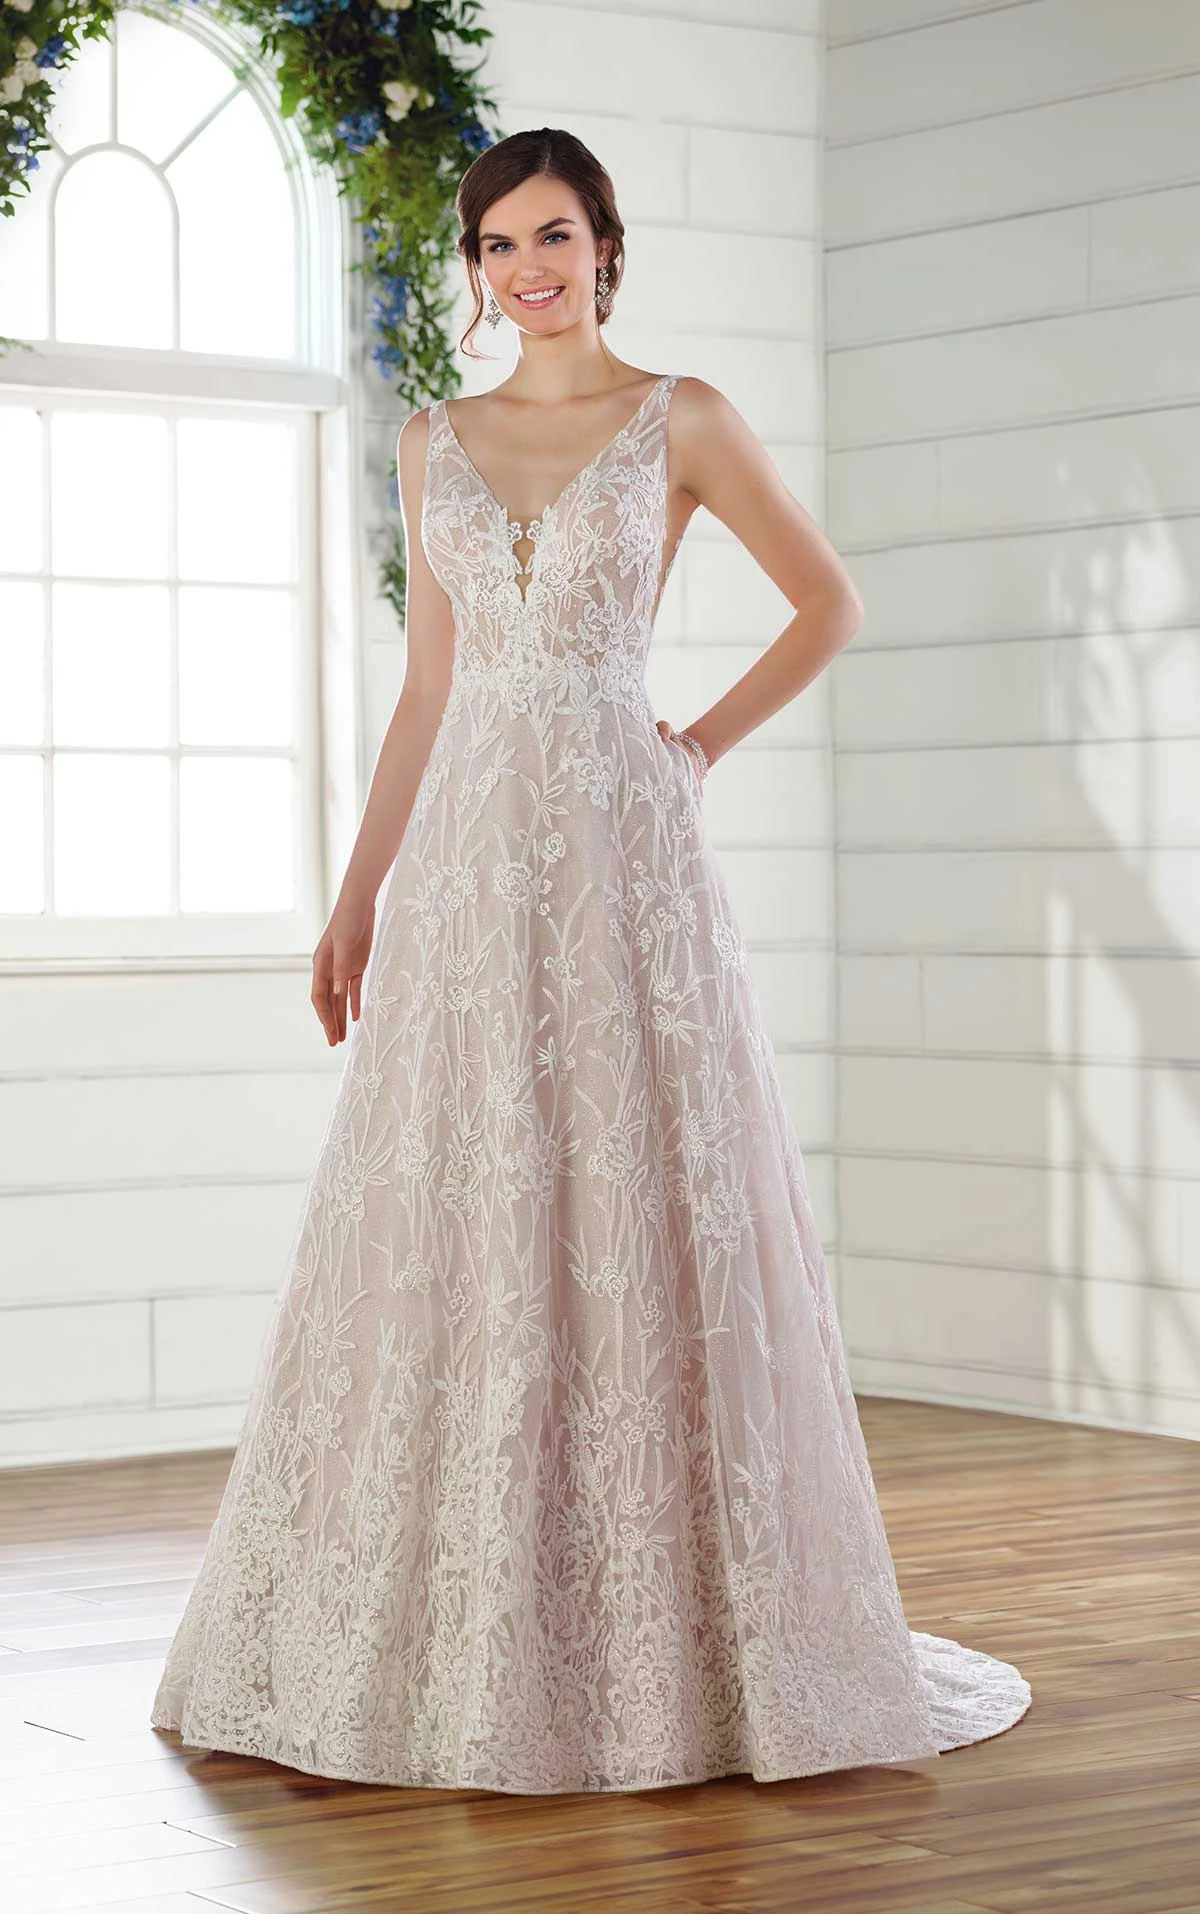 Botanical Lace Wedding Gown with Glitter Tulle